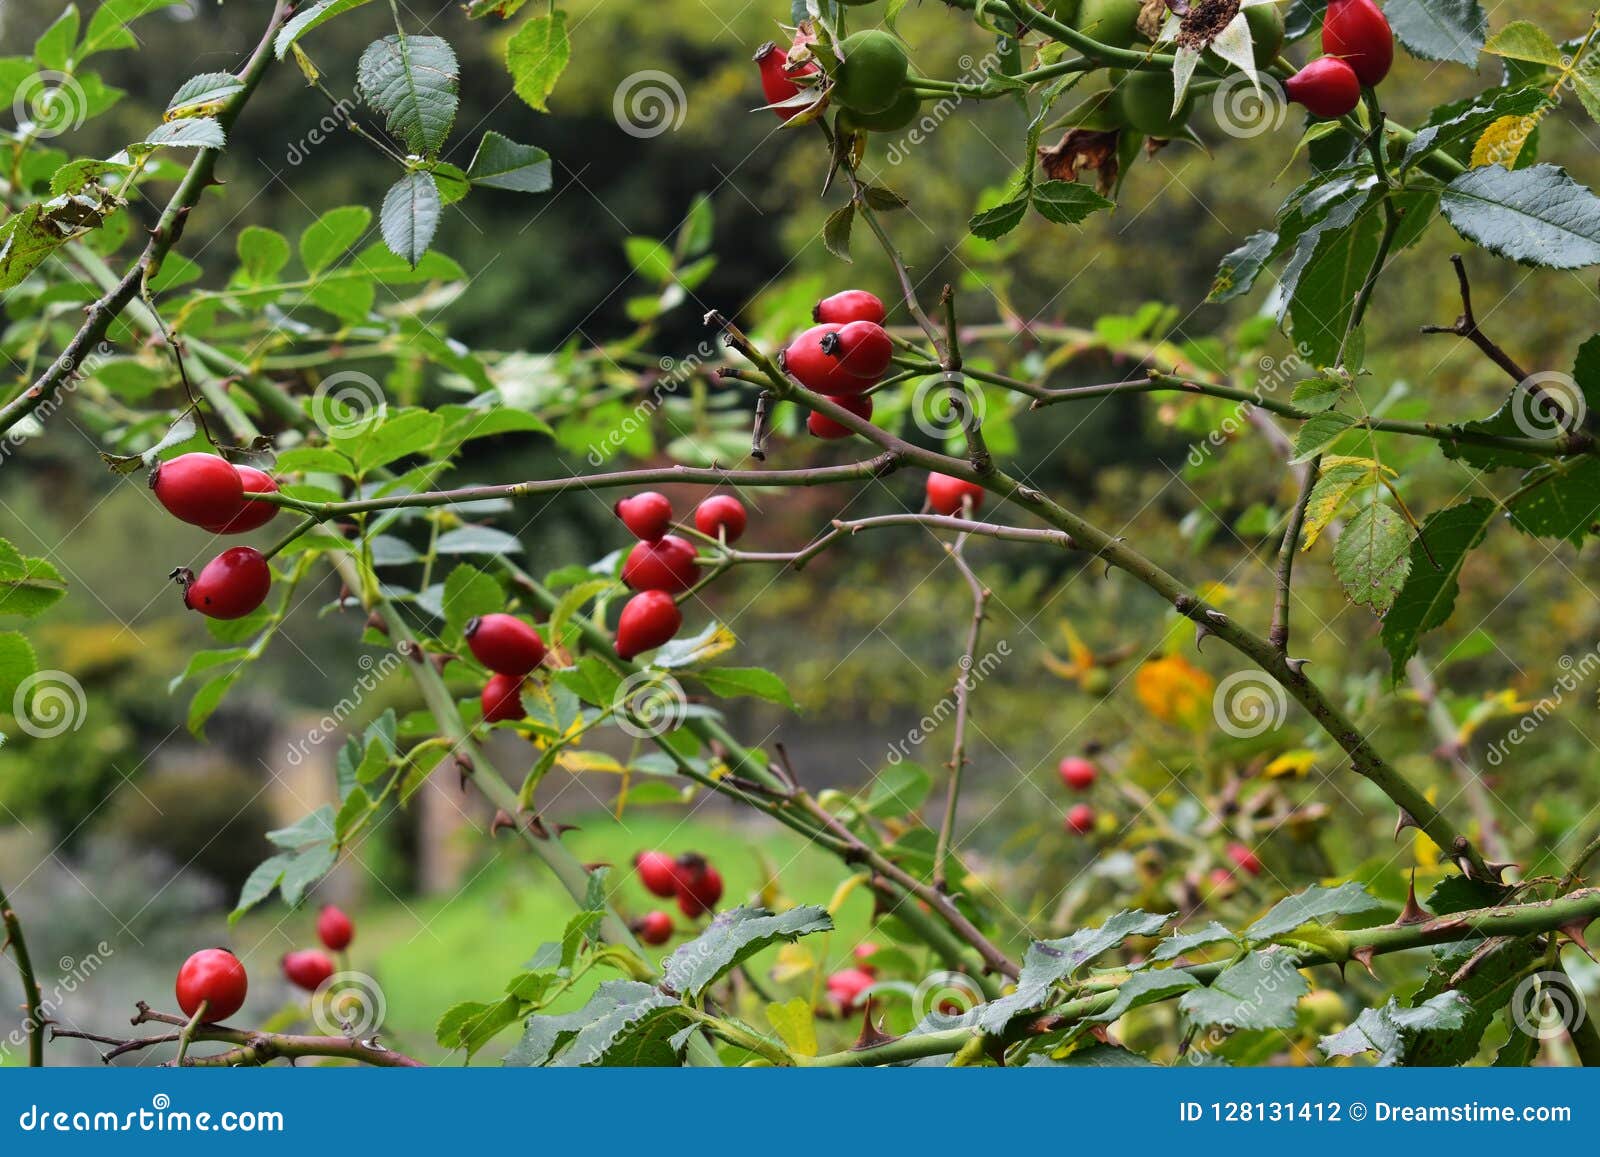 autumn rosehips in the english countryside